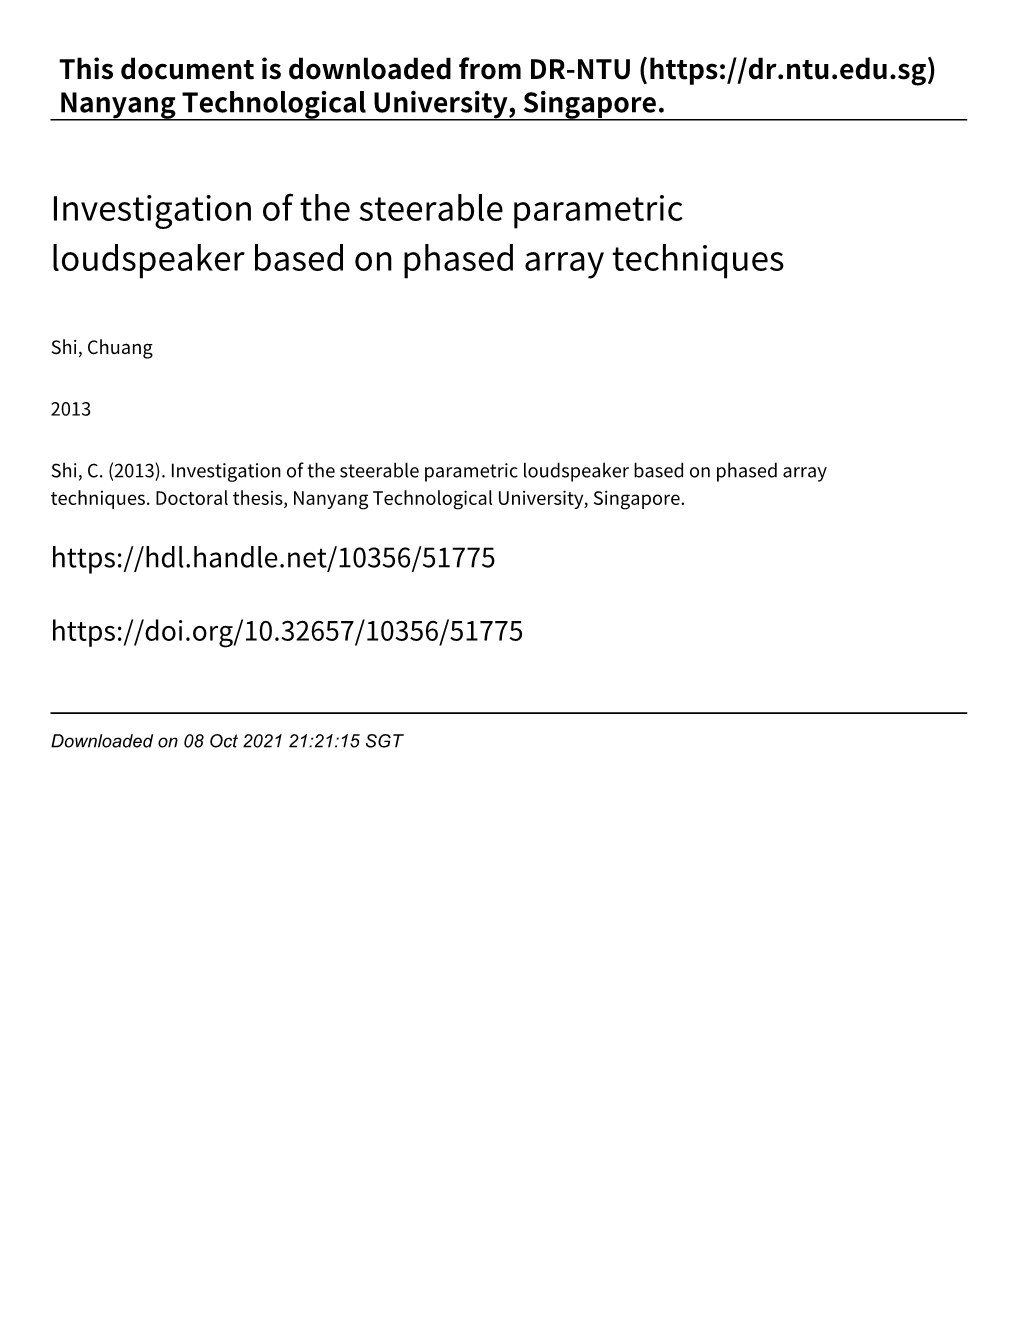 Investigation of the Steerable Parametric Loudspeaker Based on Phased Array Techniques